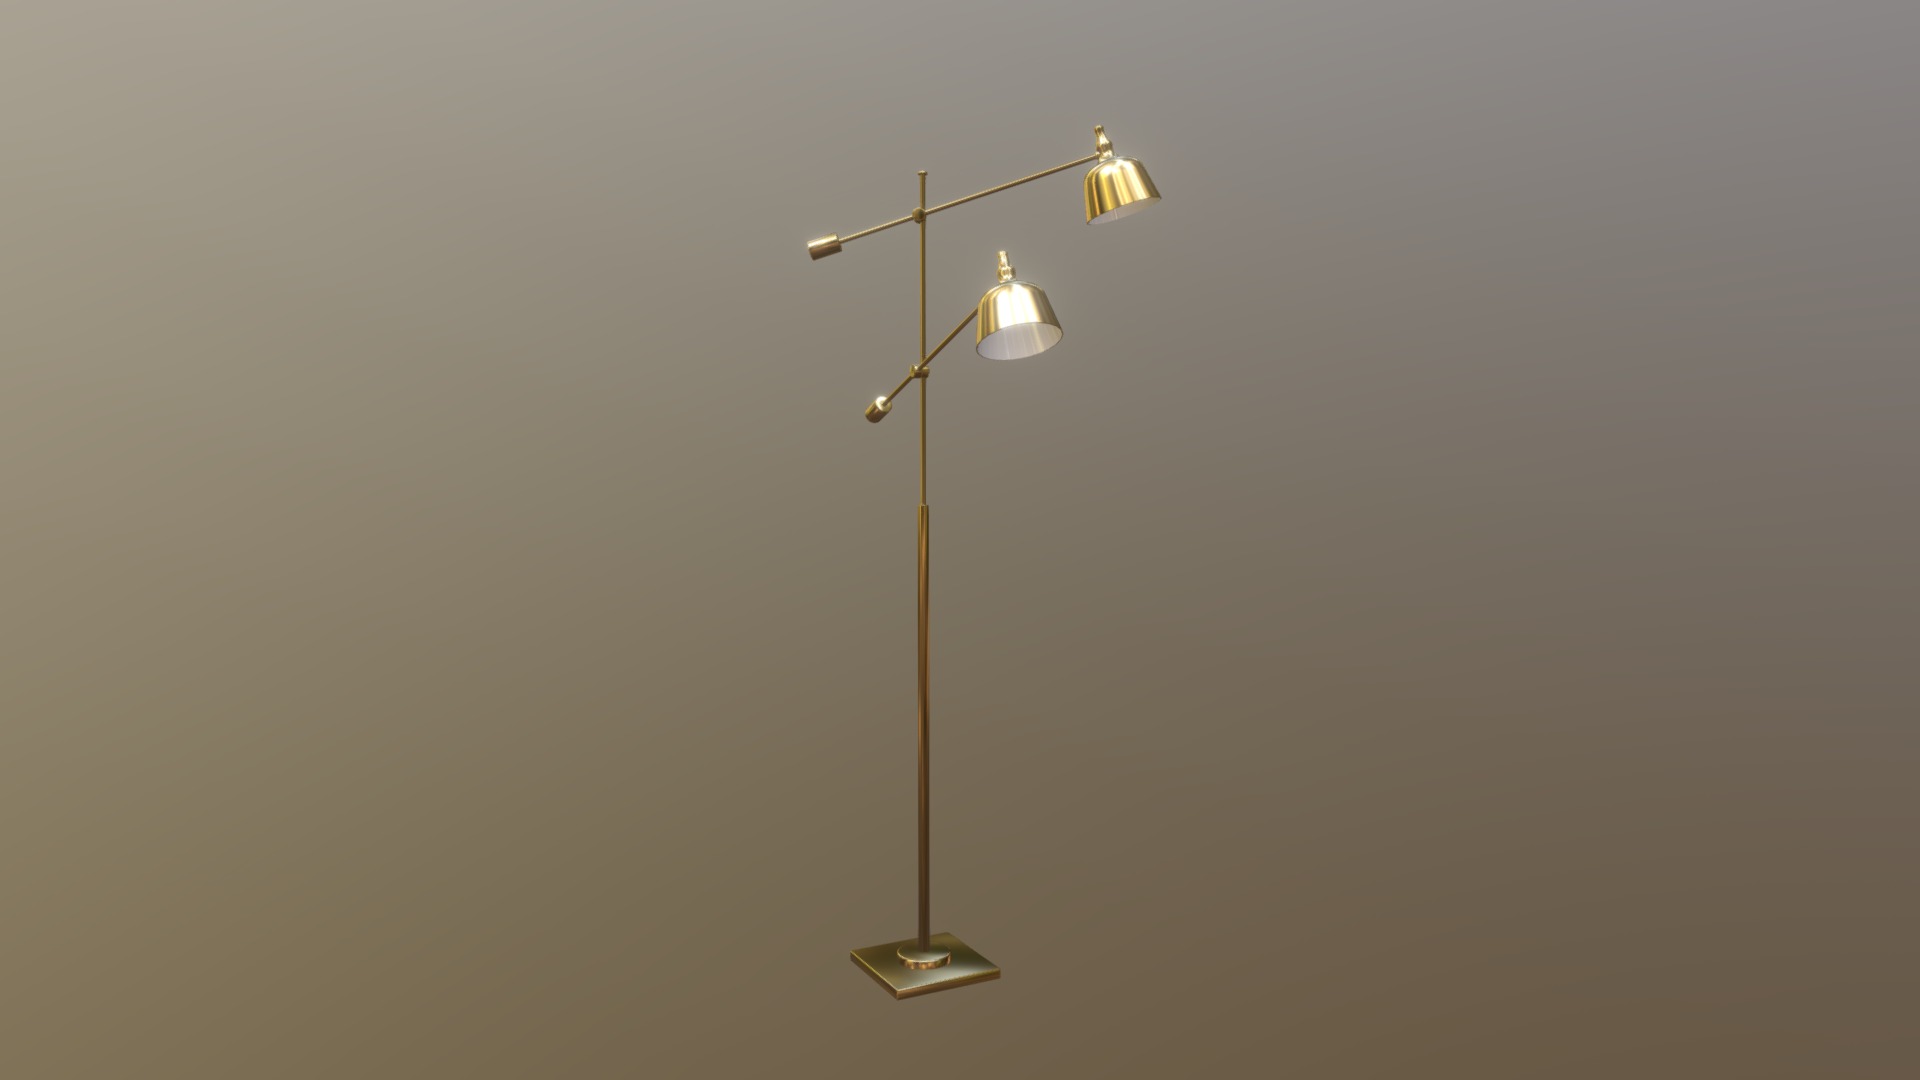 3D model Lamp 18 - This is a 3D model of the Lamp 18. The 3D model is about a light fixture on a pole.